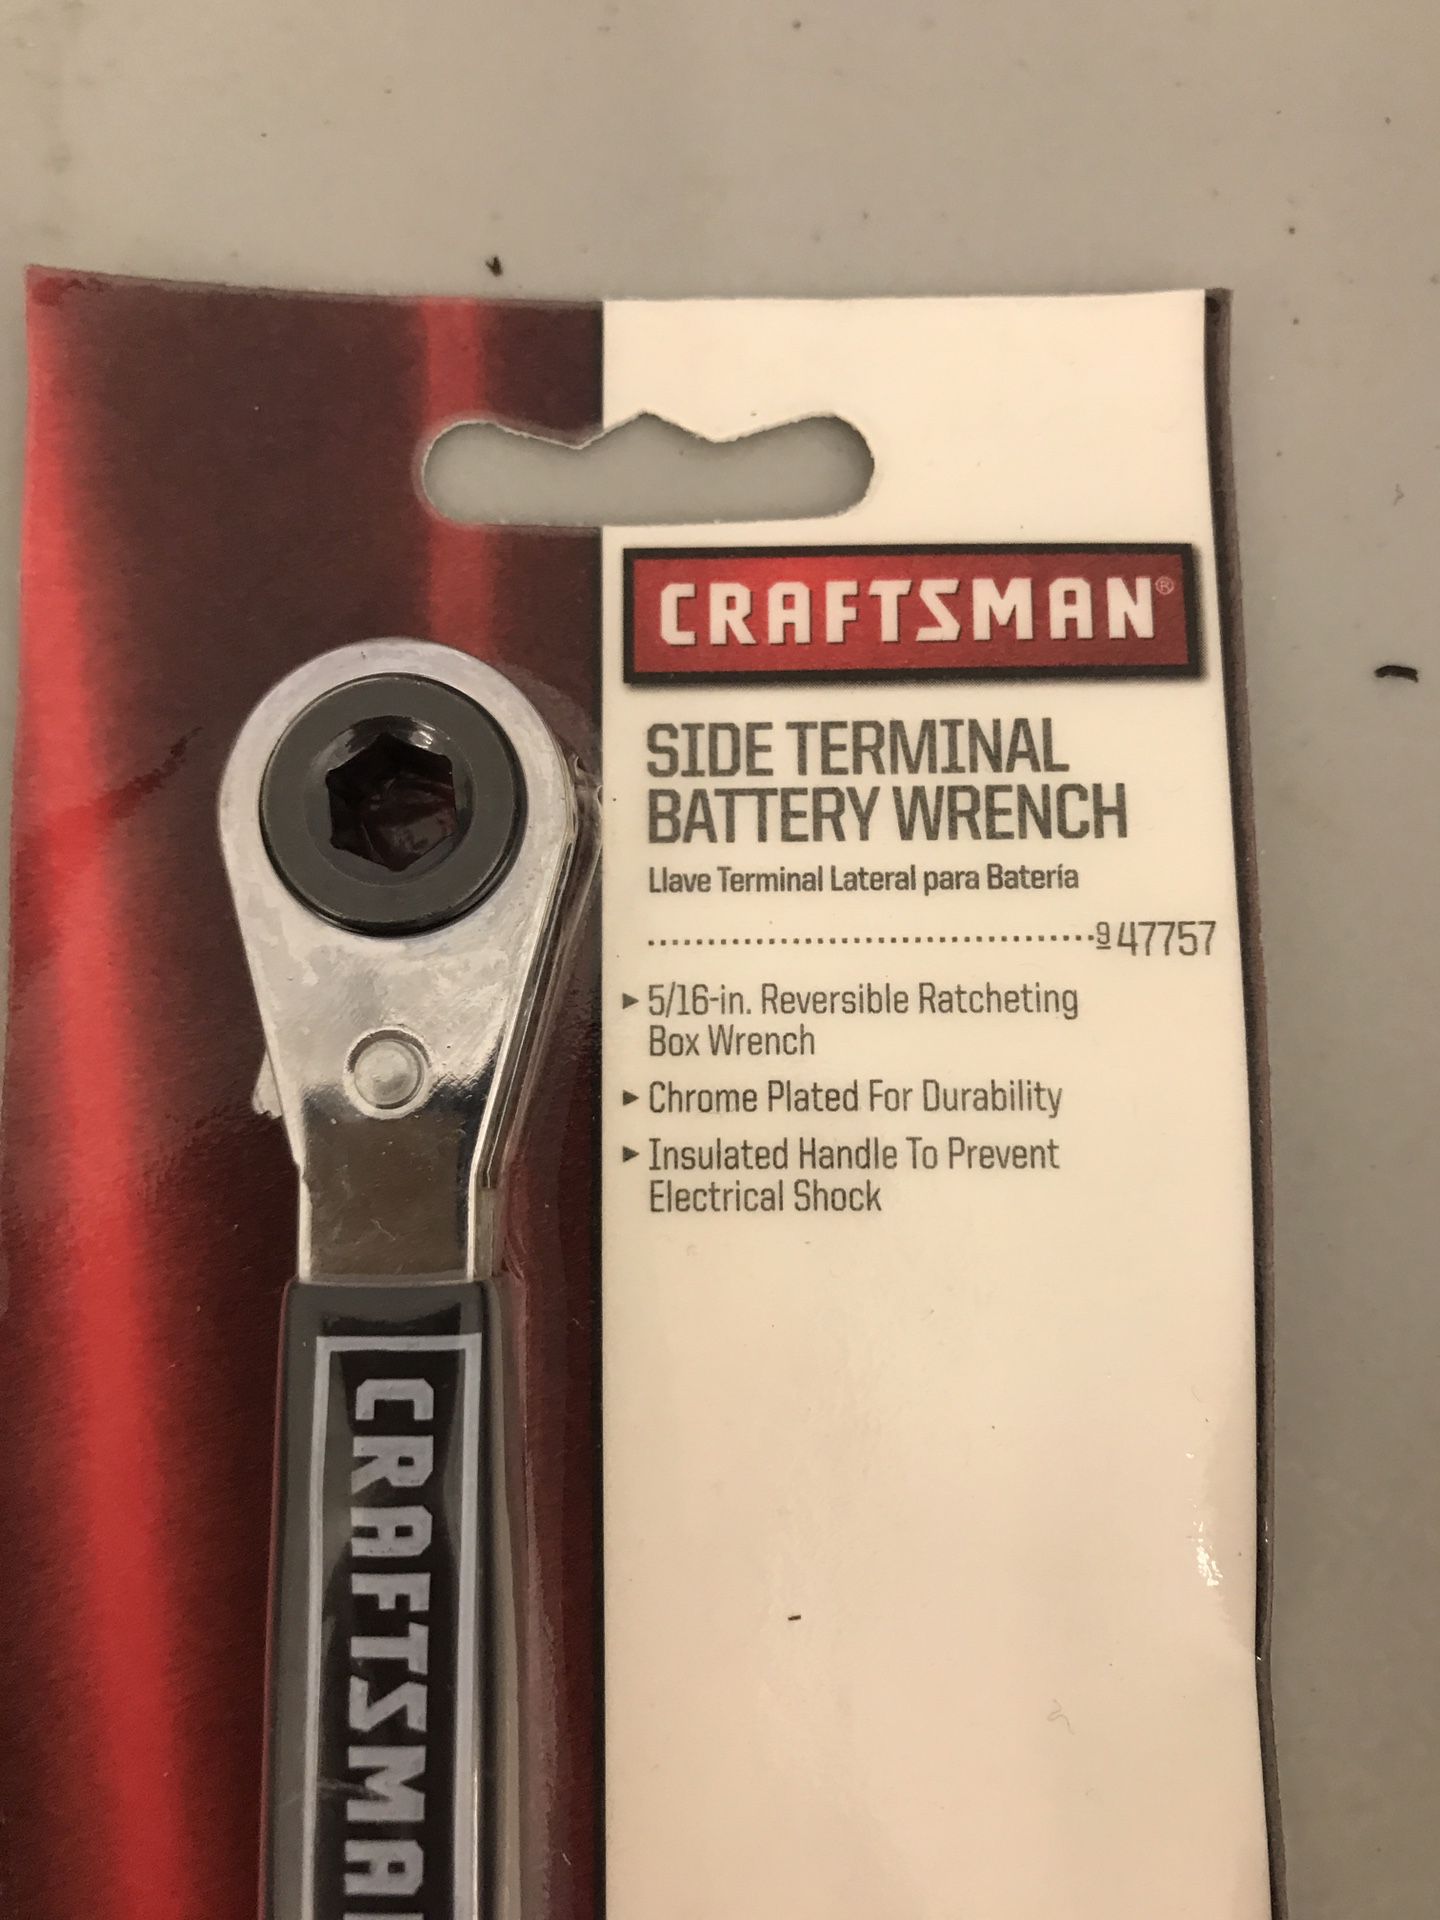 Craftsman side terminal battery wrench